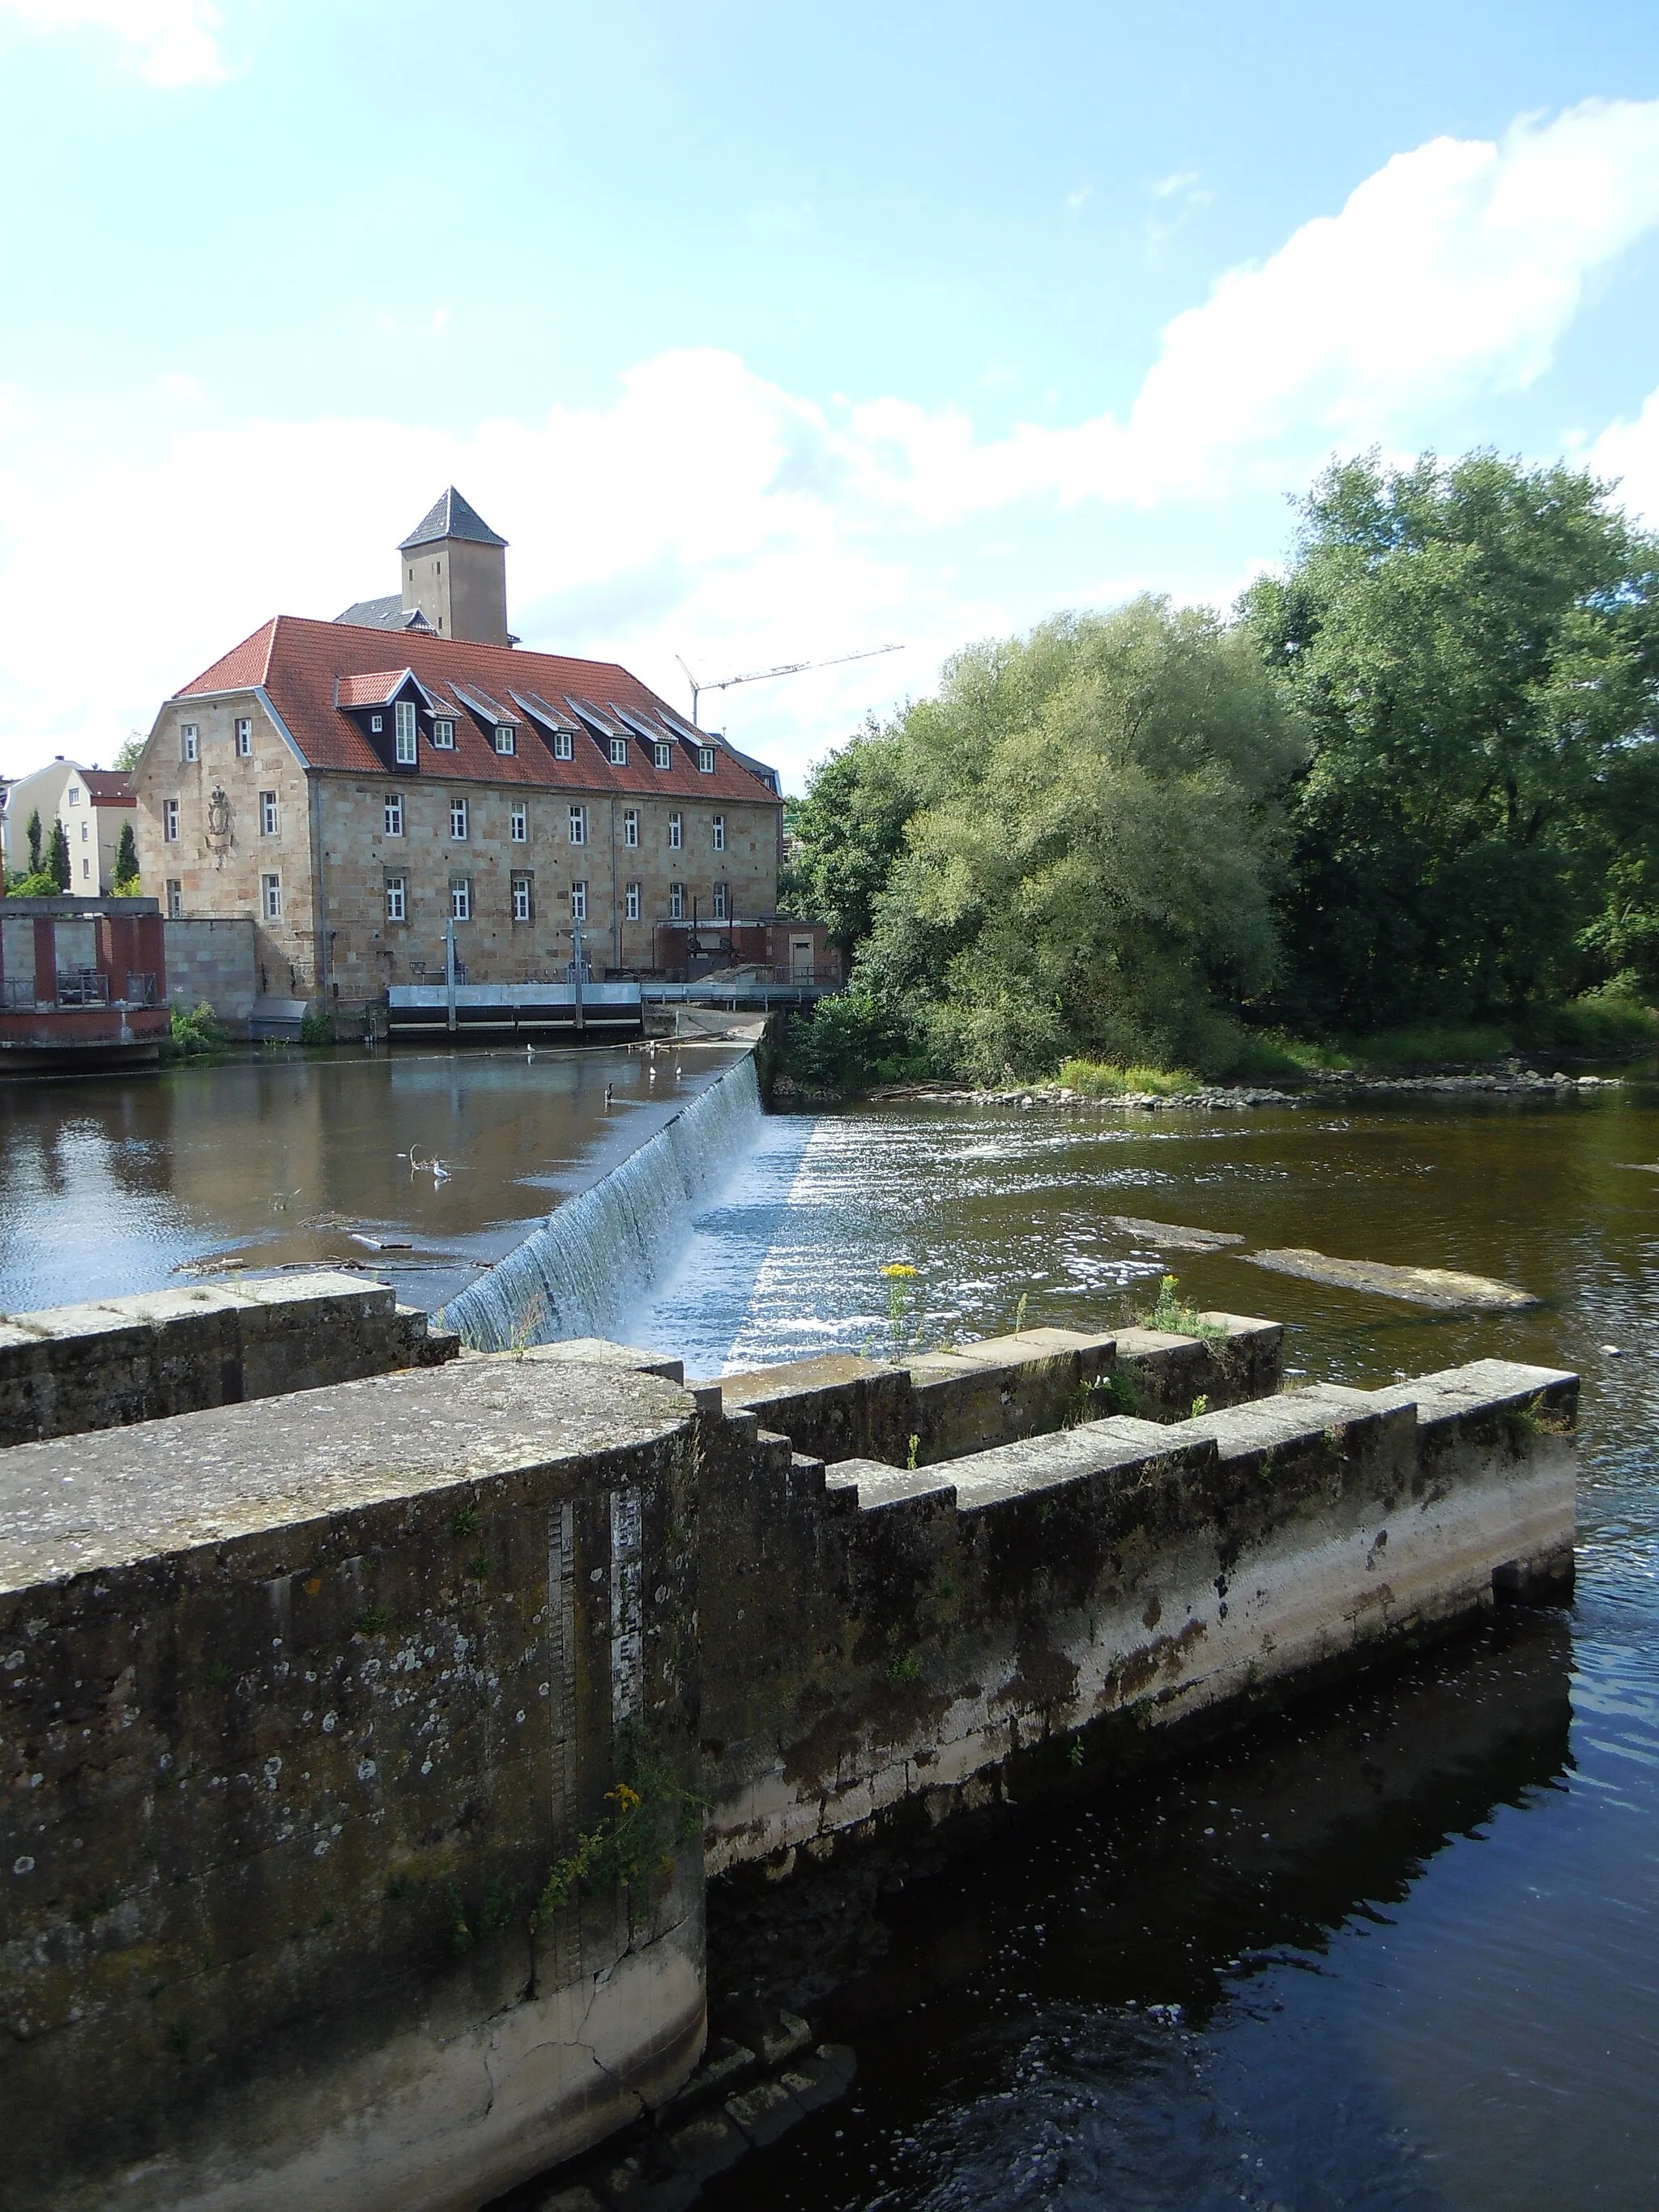 Photo showing: Dam of River Ems in Rheine (Germany), built in 1550